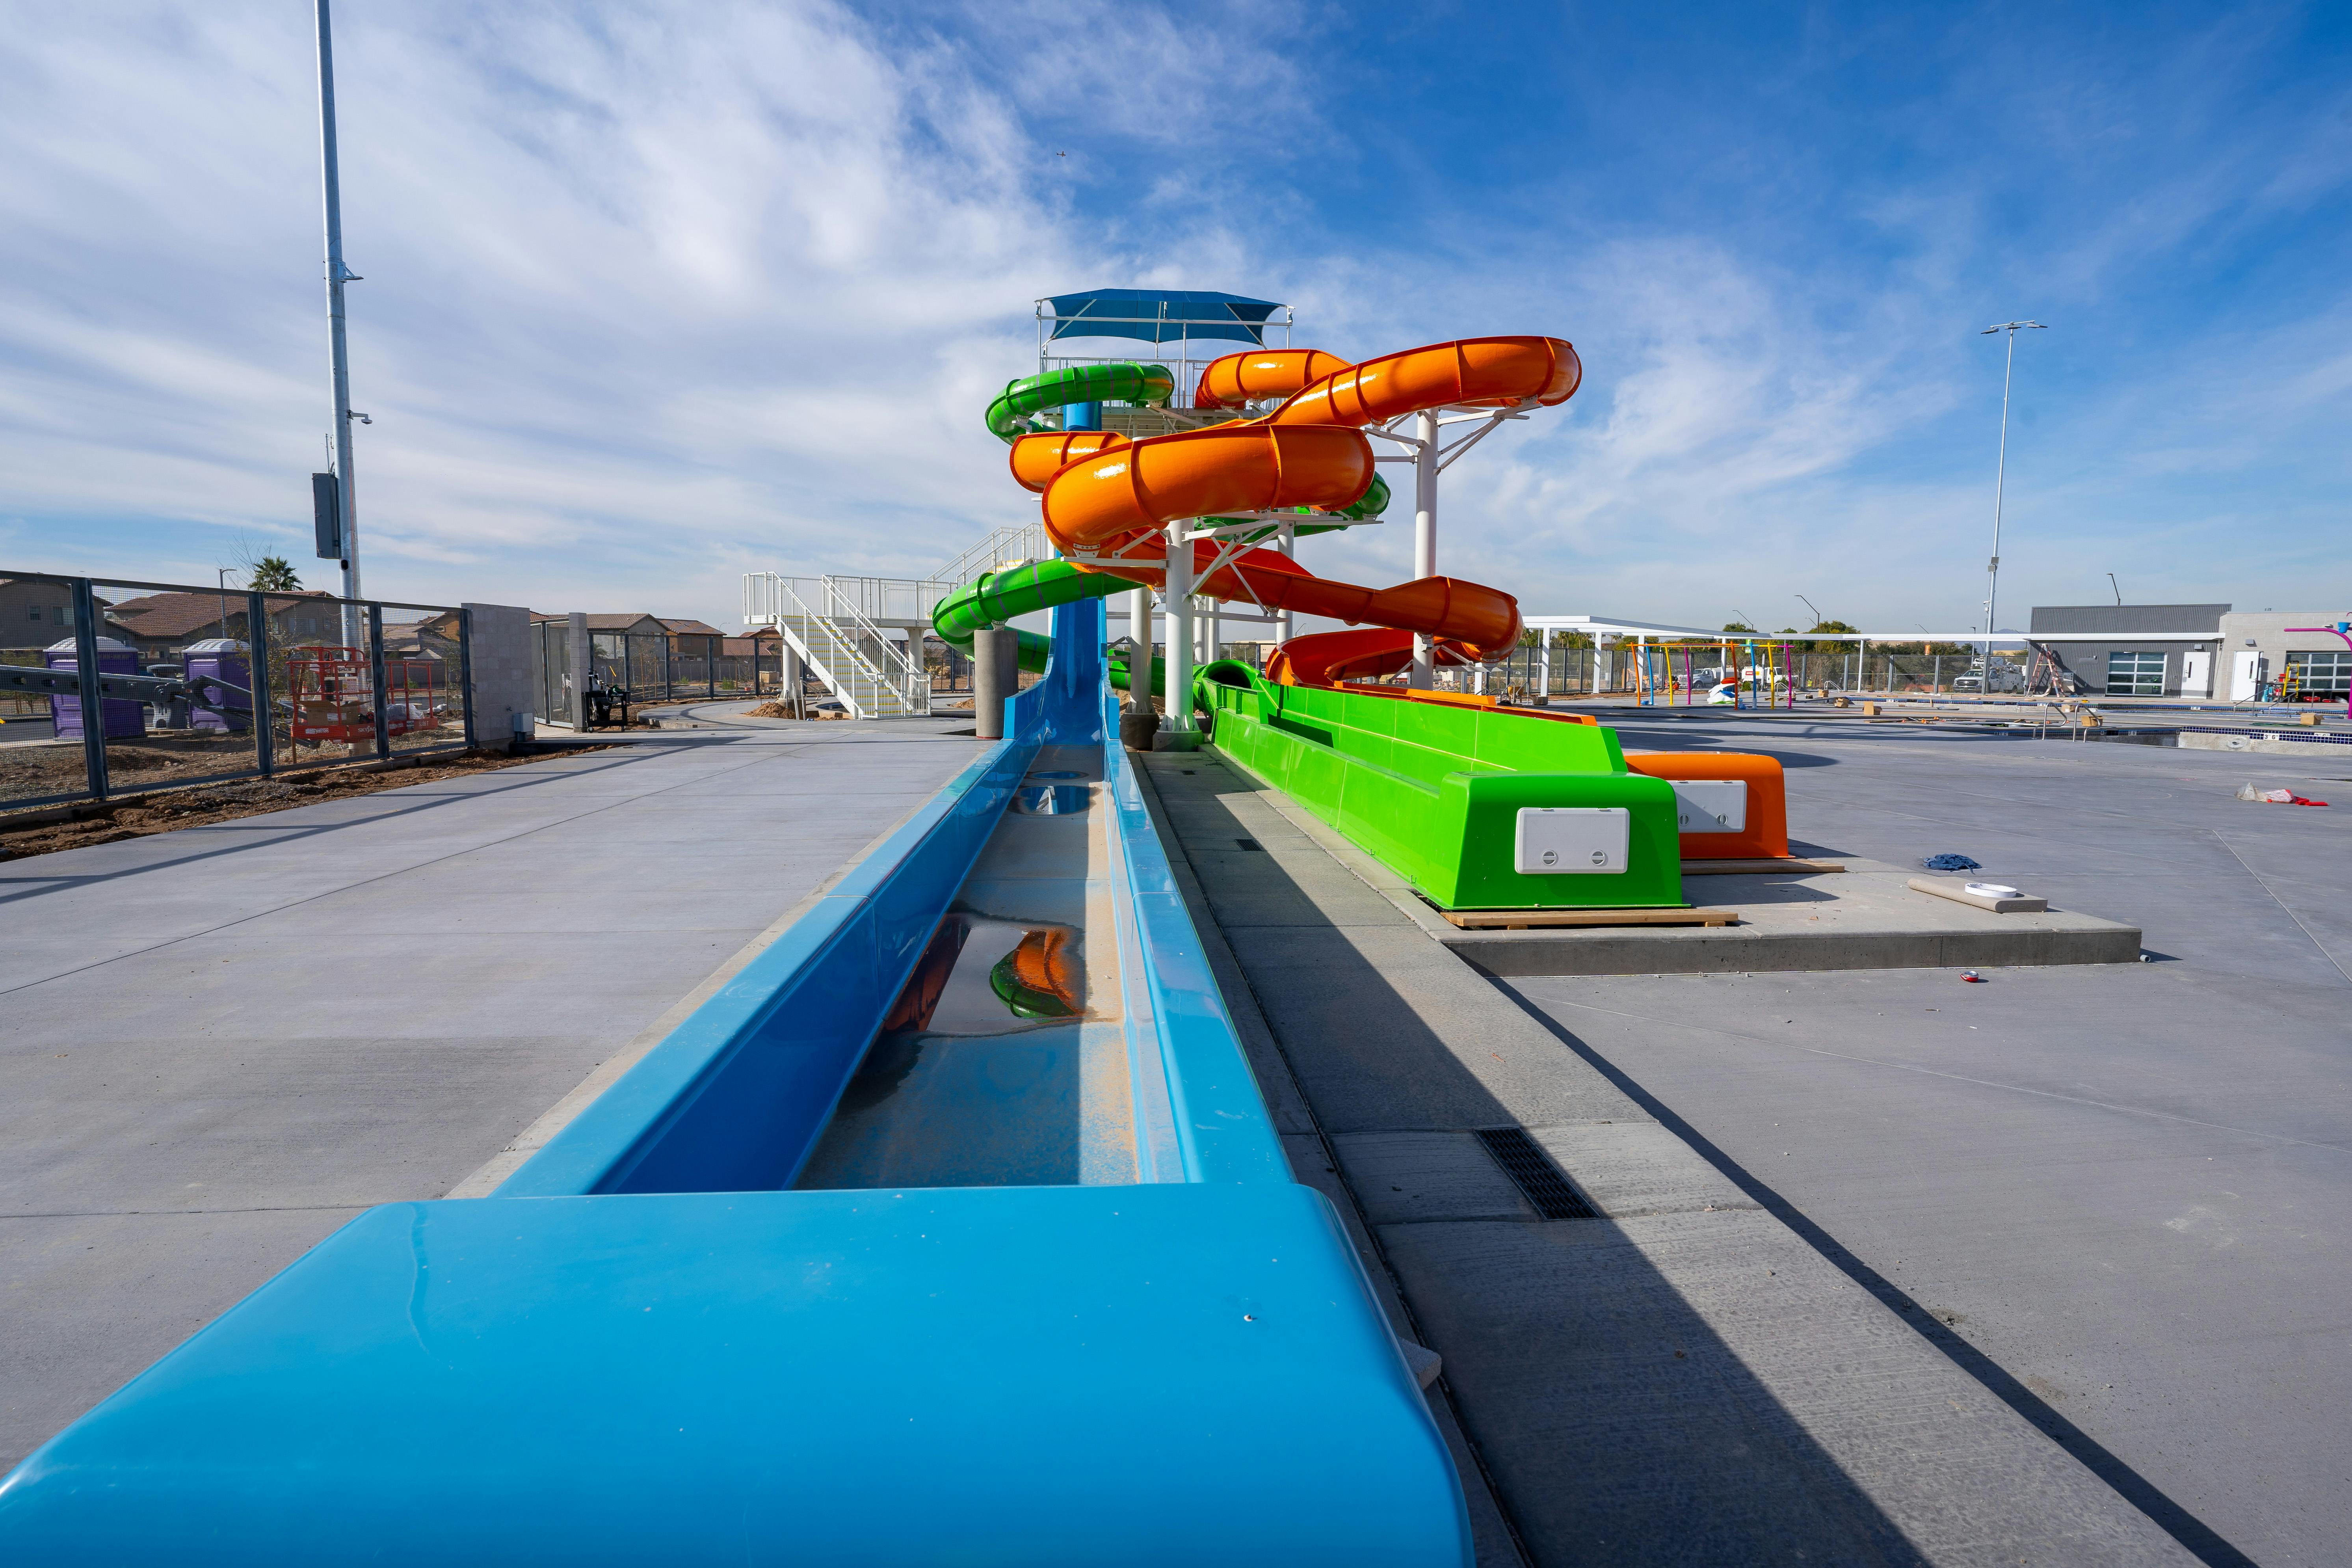 View from the water slide 'runouts'